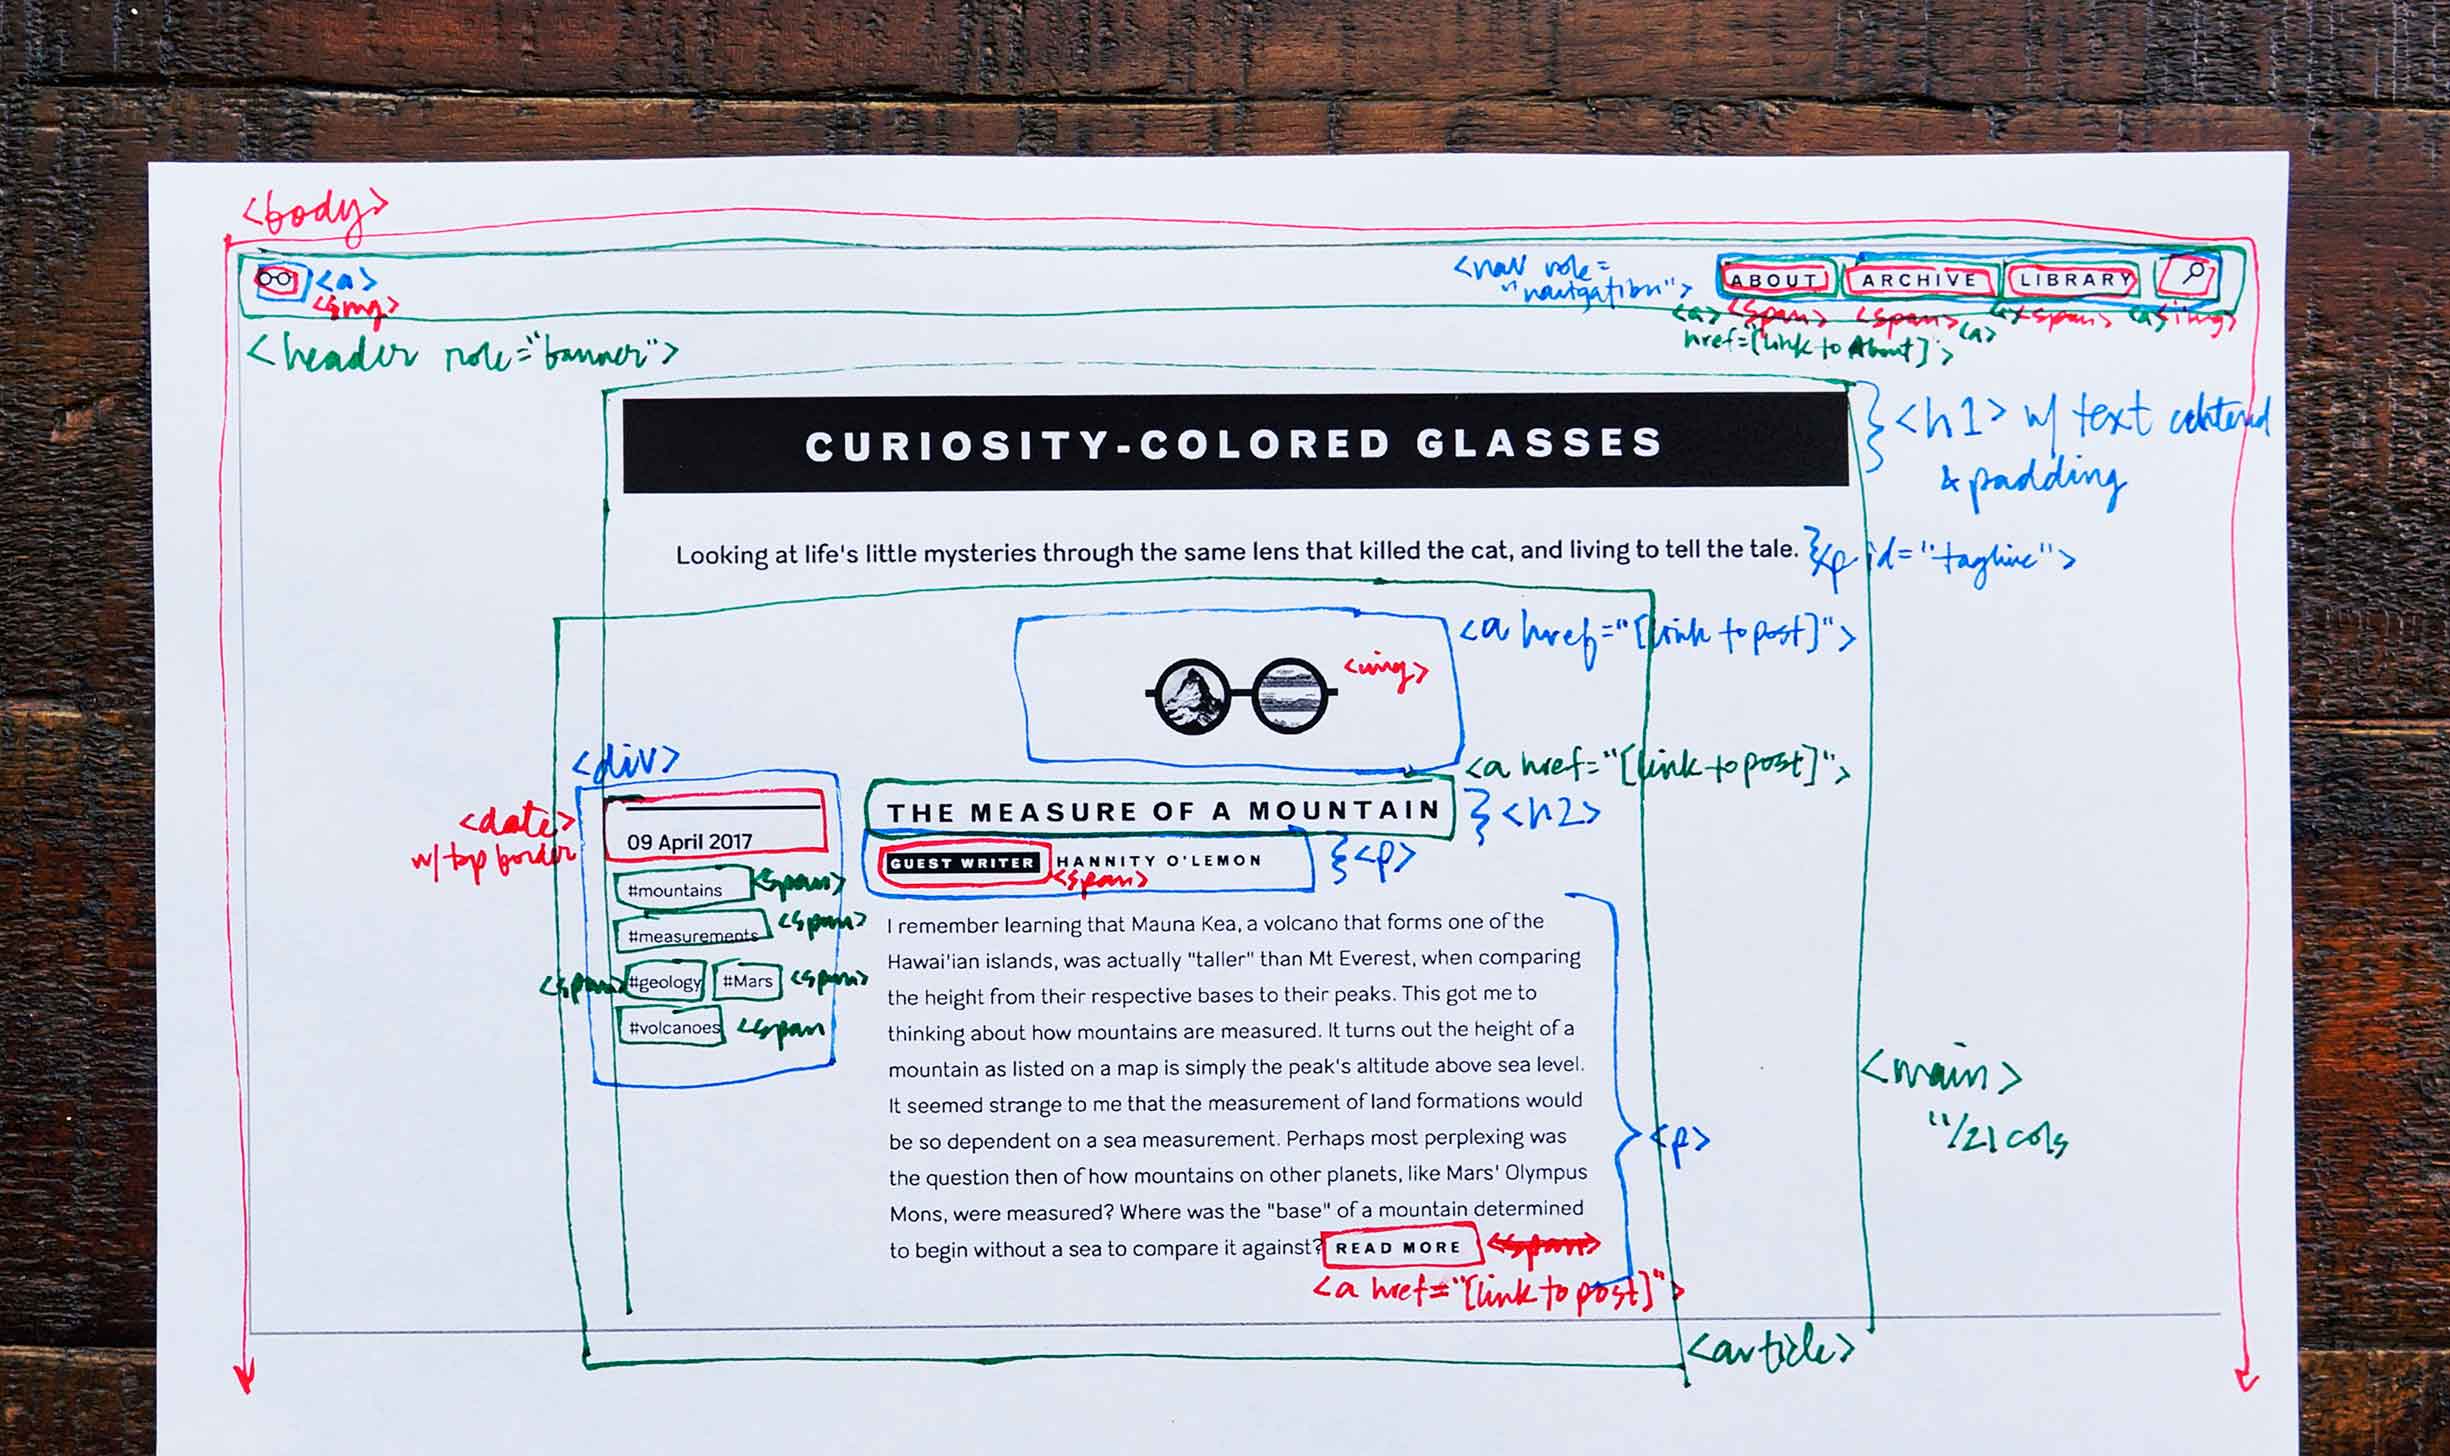 I drew colored boxes around planned HTML elements on a printout of Curiosity-Colored Glasses' home page design.